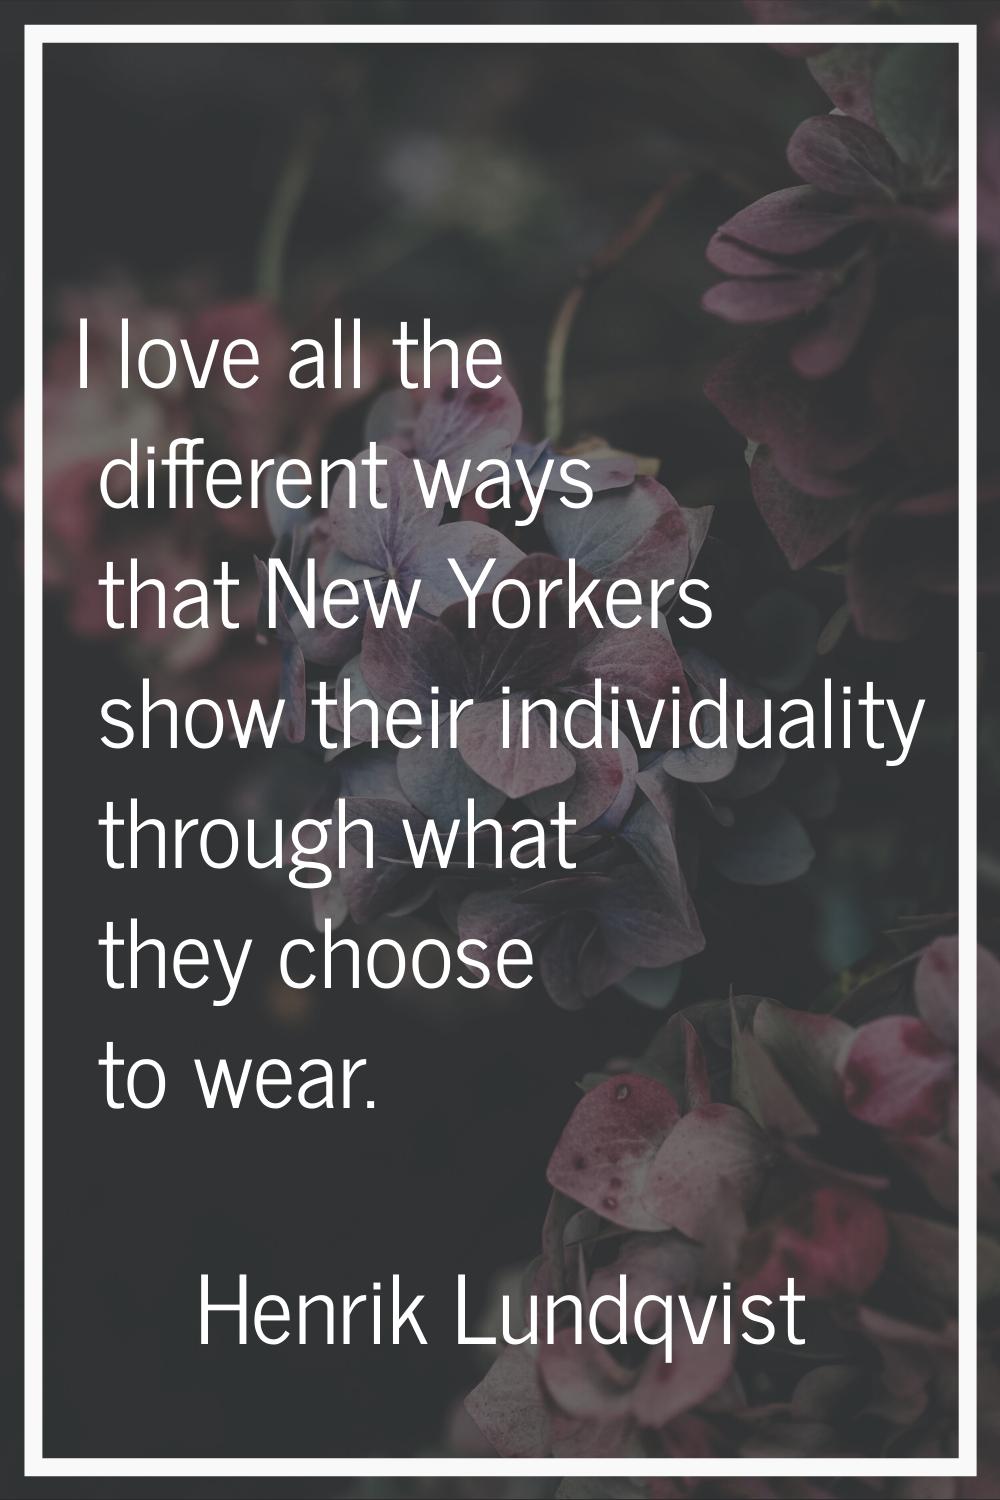 I love all the different ways that New Yorkers show their individuality through what they choose to